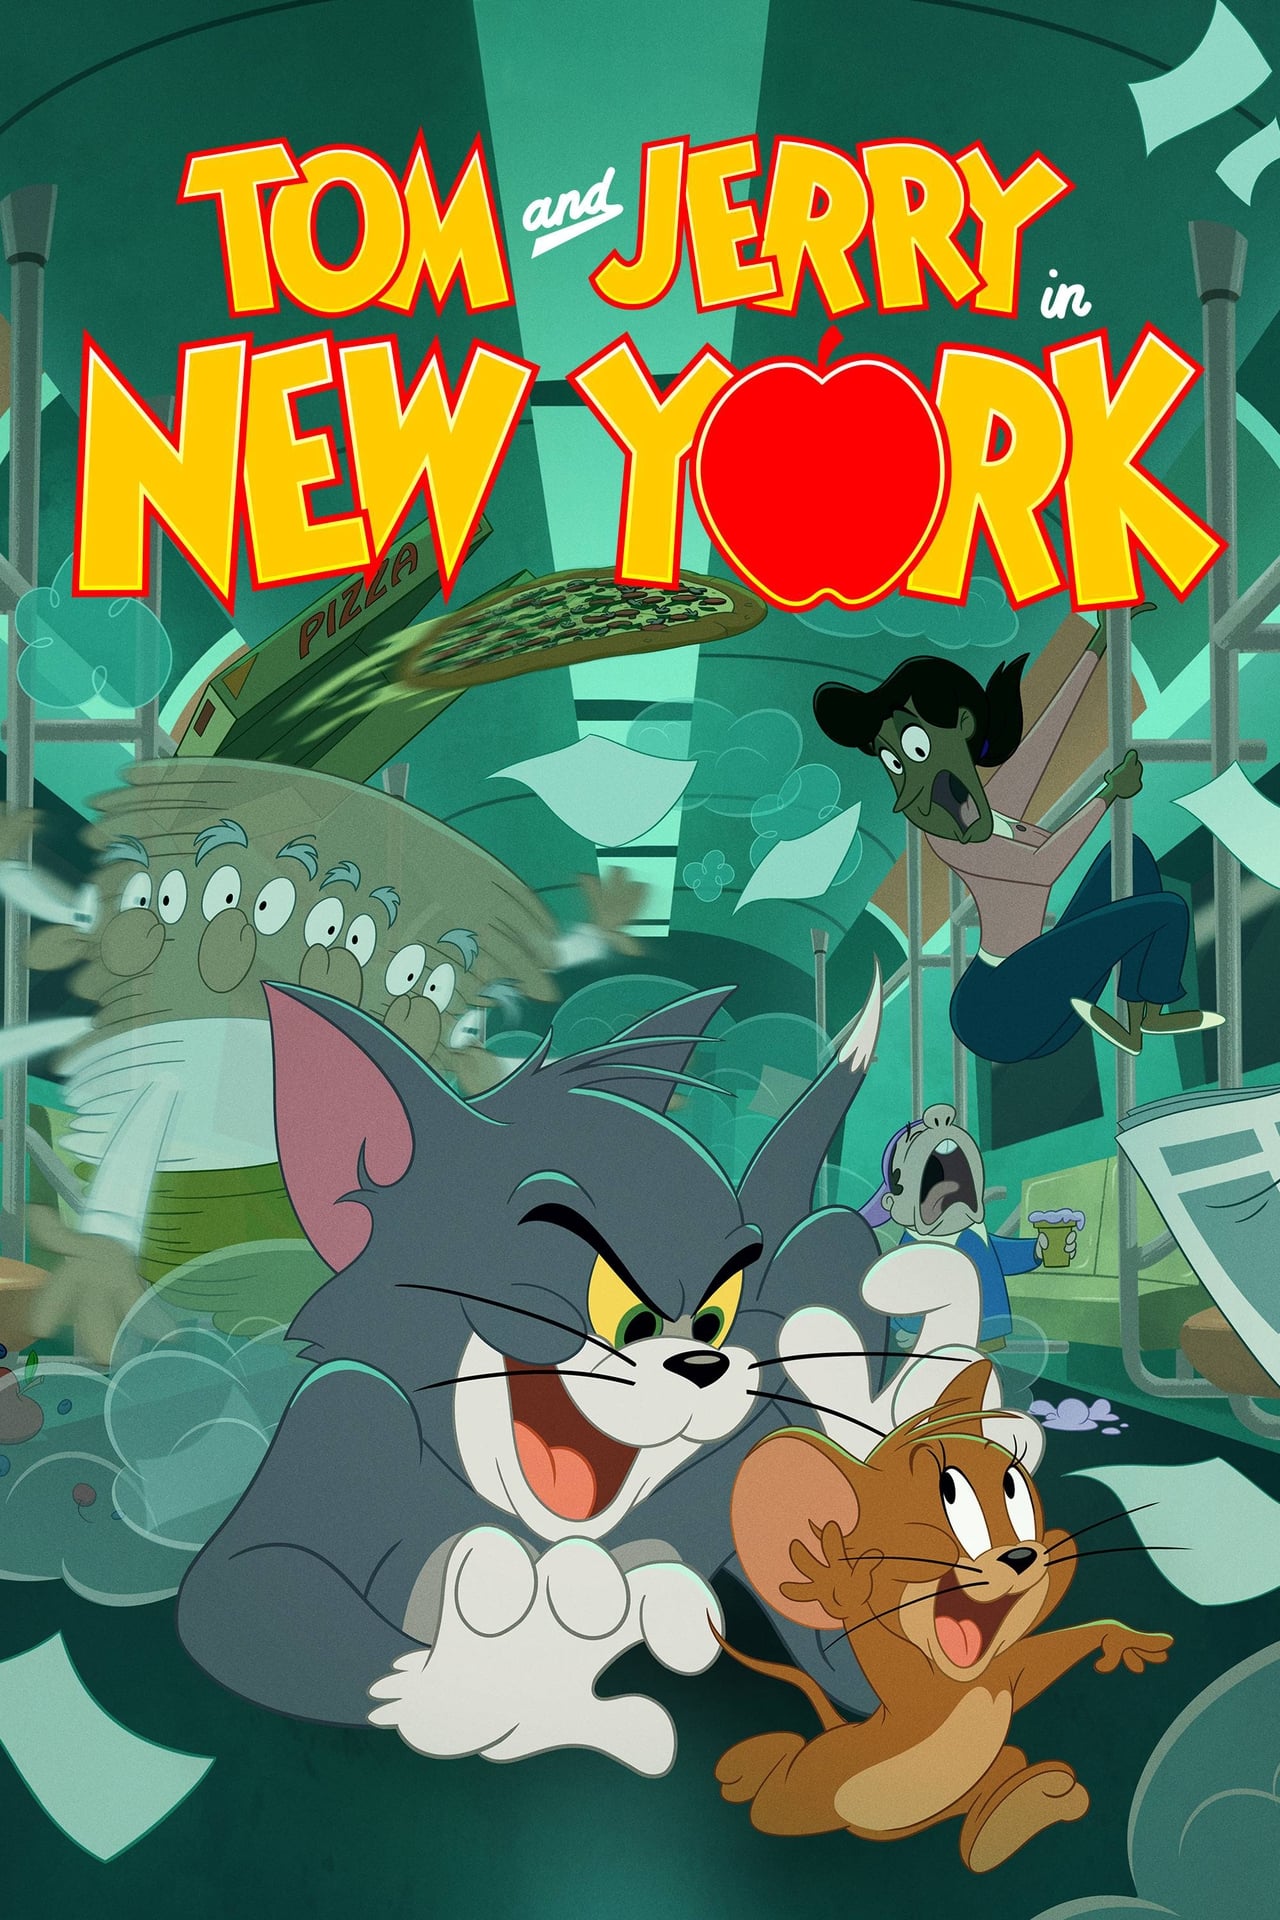 Tom and Jerry in New York (season 2)